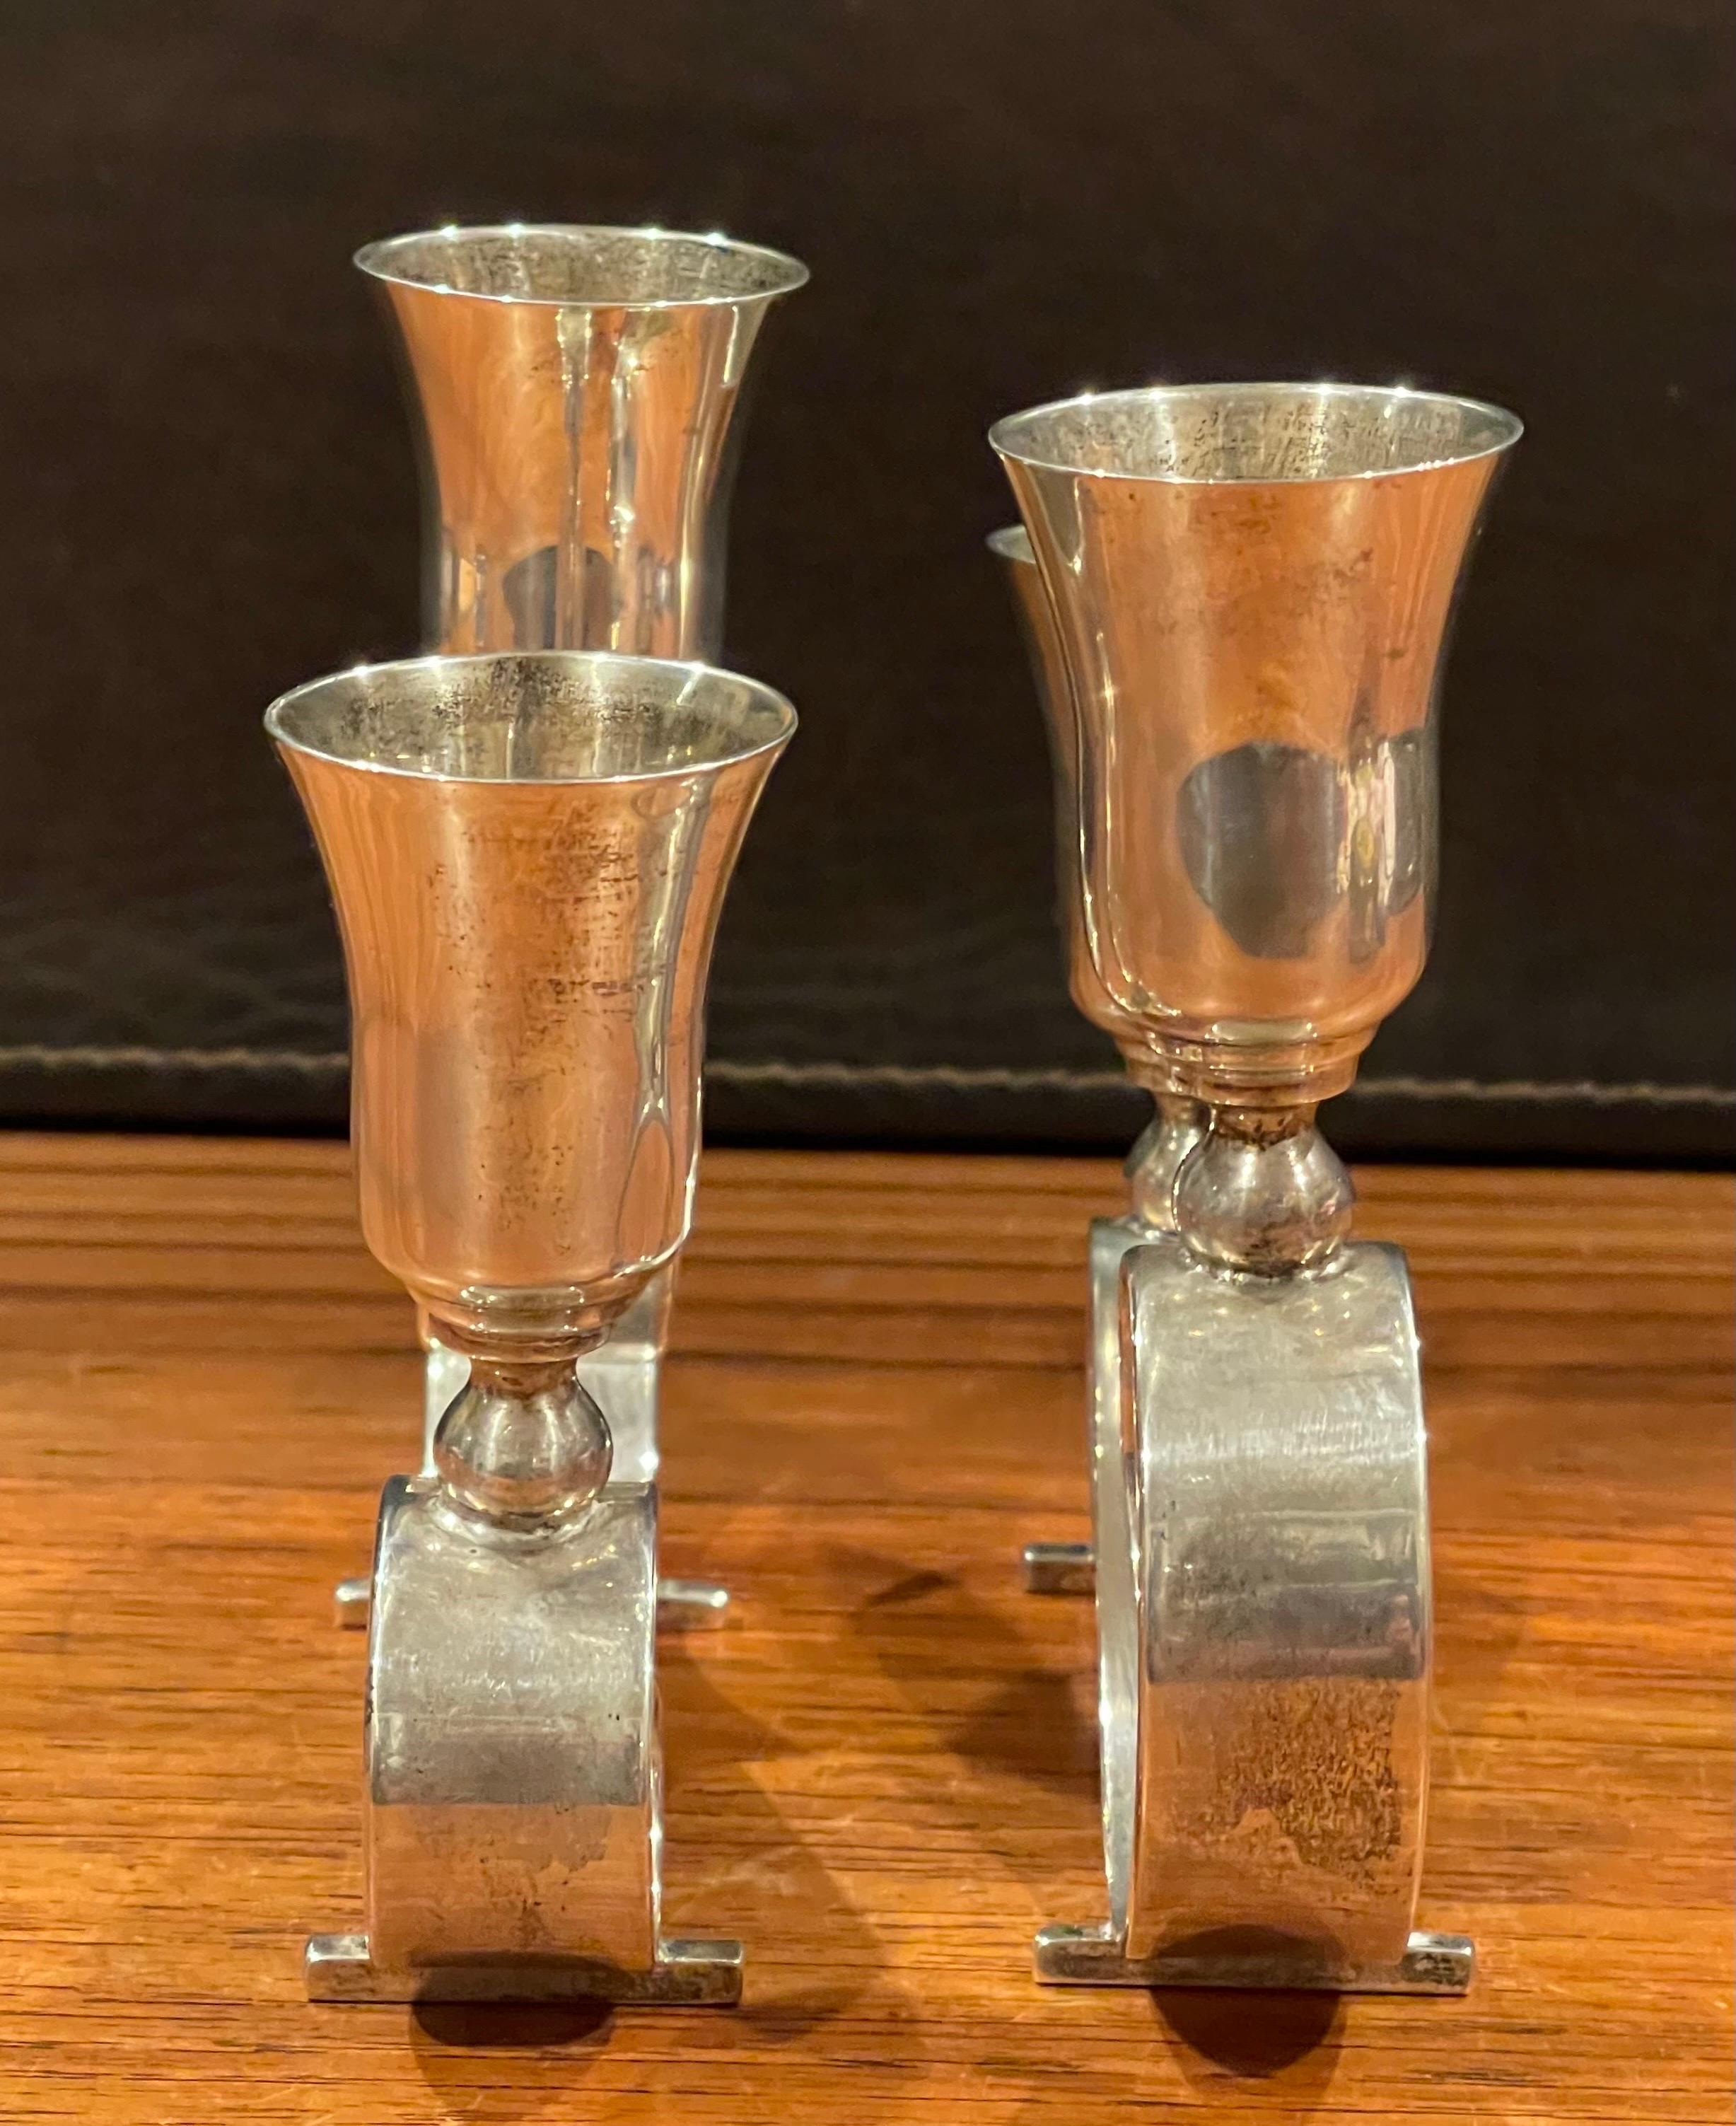 20th Century Pair of MCM Modernist Sterling Silver Candleholders by Juvento Lopez Reyes